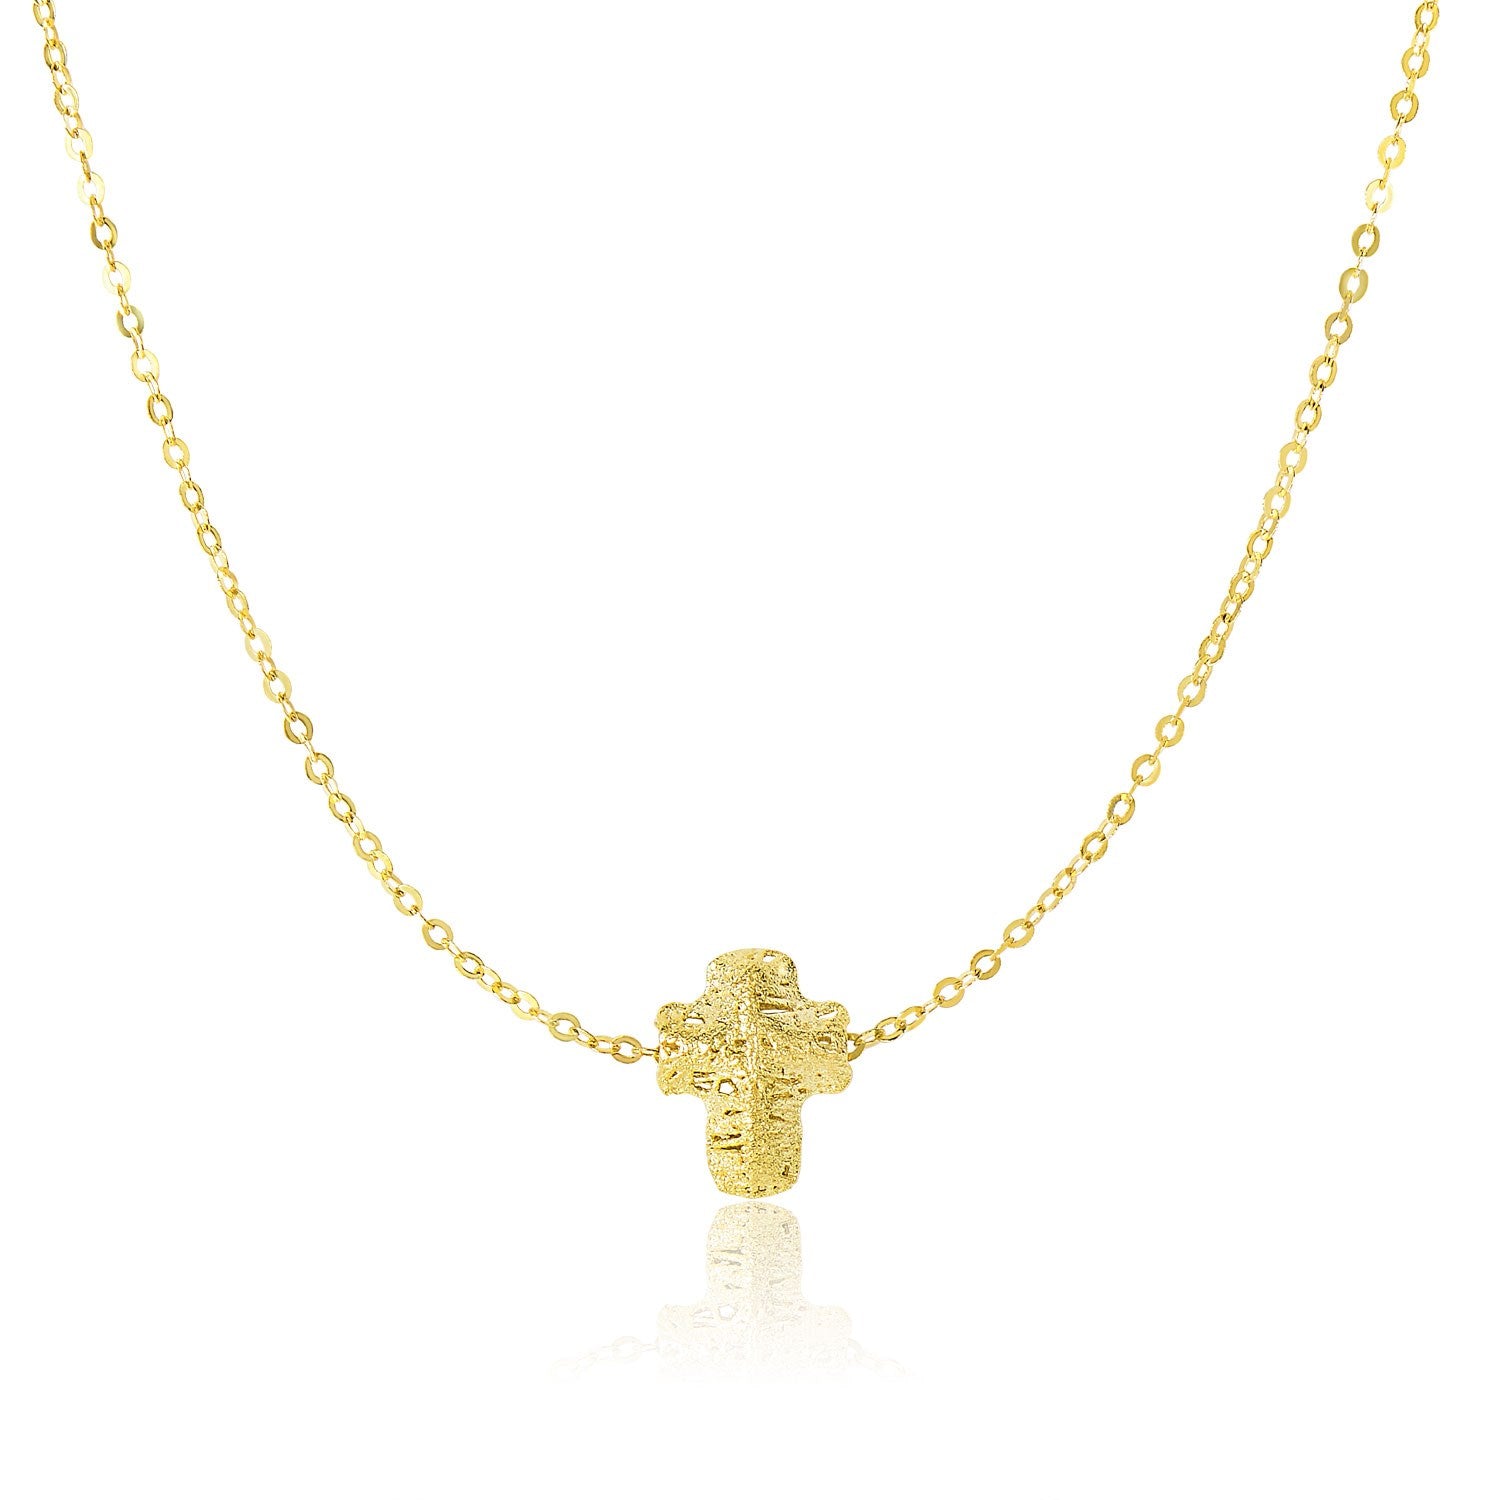 Mesh Style Puff Crucifix Necklace in 14k Yellow Gold